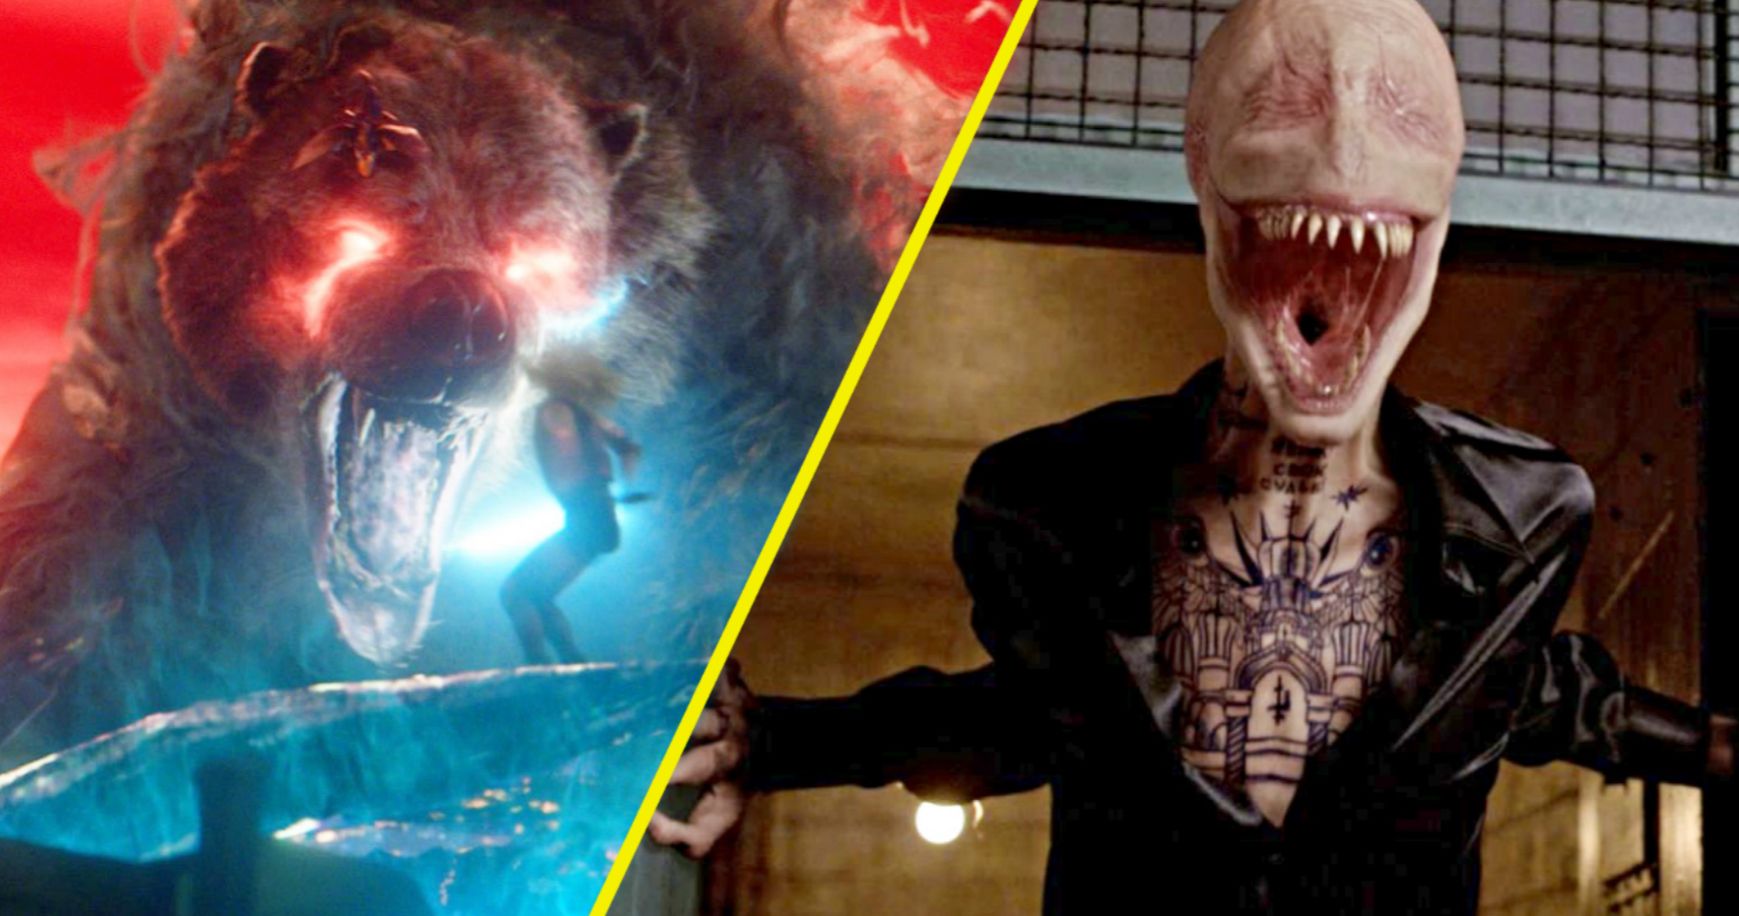 Scary The New Mutants Images Reveal Magik Vs. Demon Bear Fight and the Smiley Men